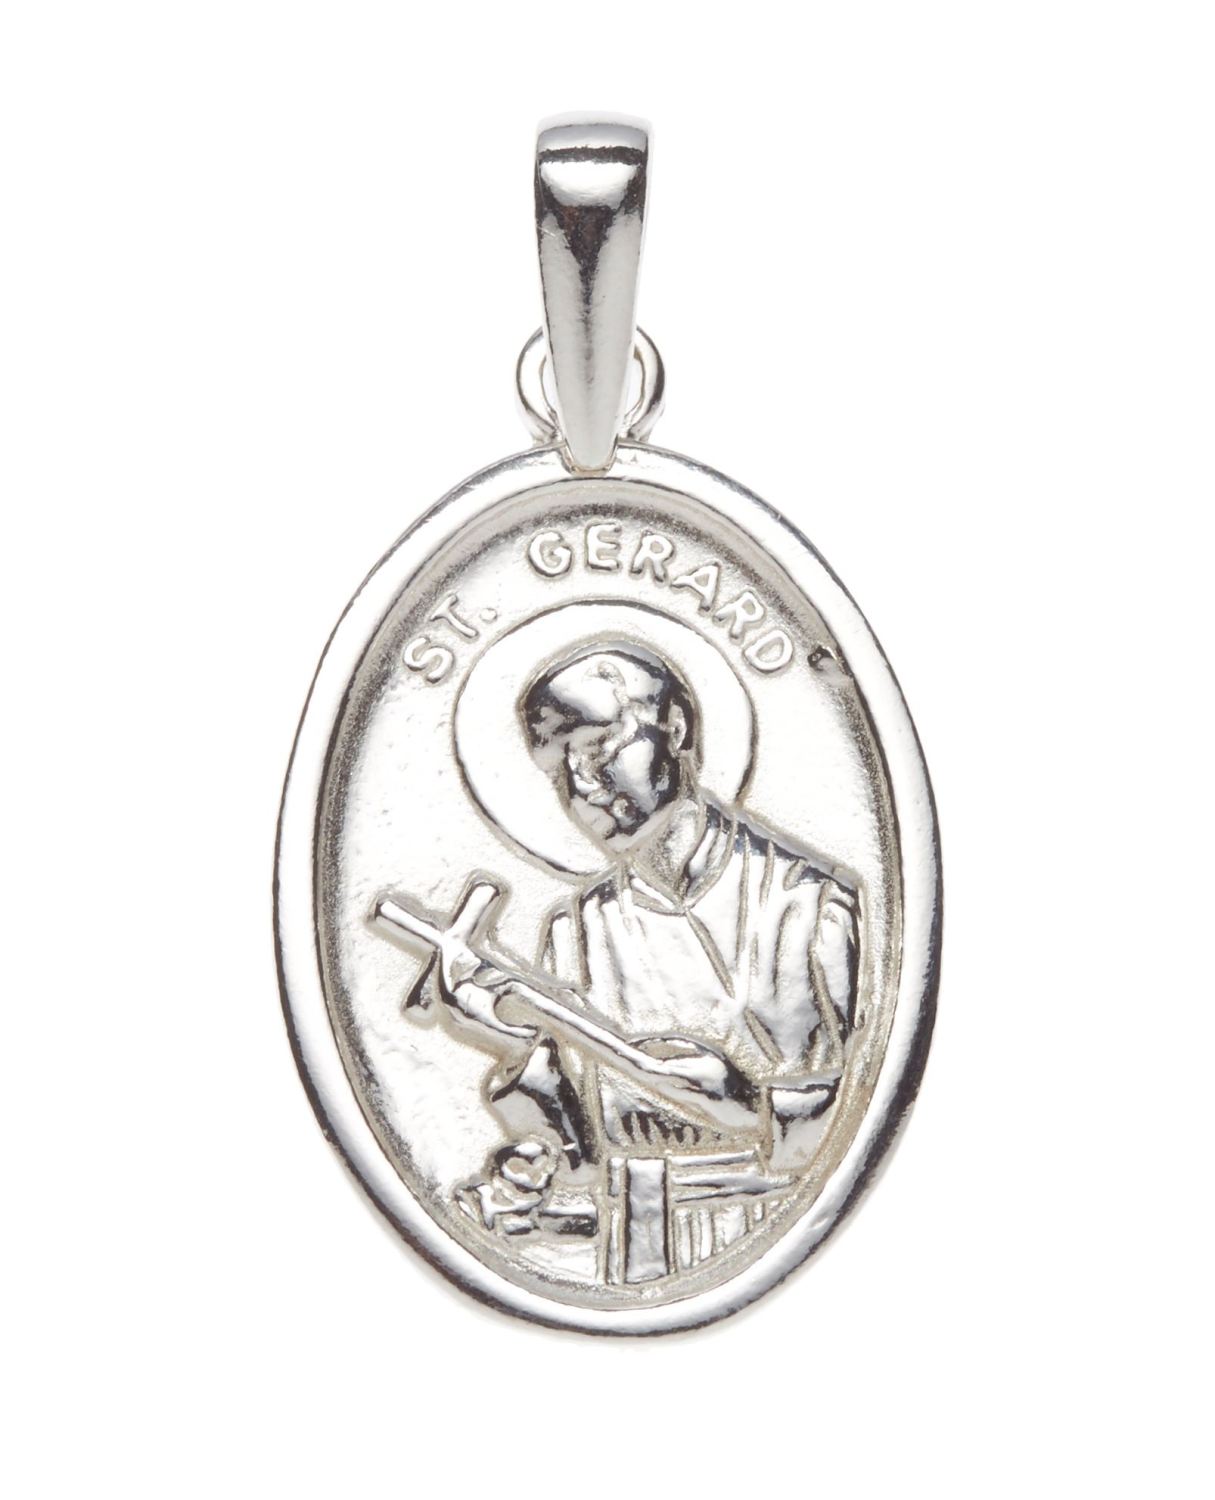 Snapklik.com : St Gerard Medal For Pregnancy Fertility 925 Sterling Silver  Gold Saint Gerard Necklace St Gerard Necklace For Women Protection Jewelry  Religious Gifts